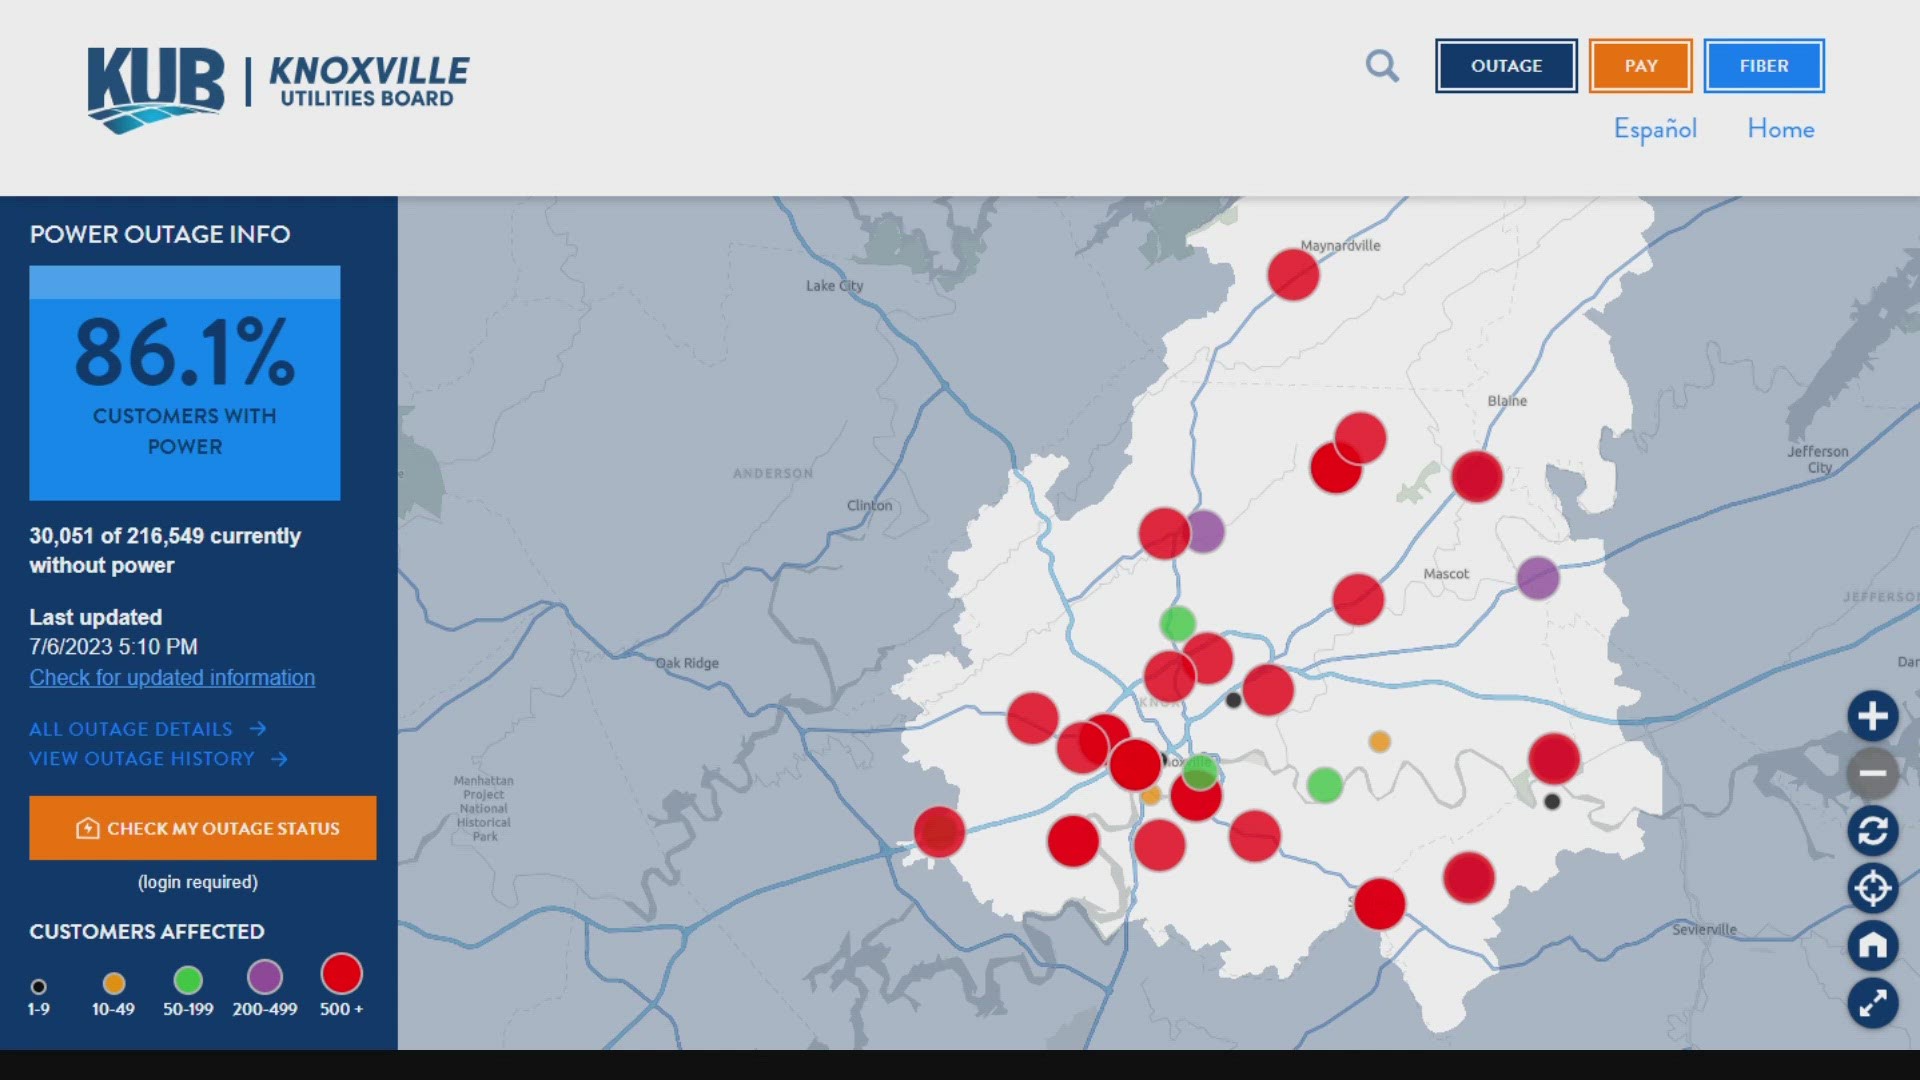 At around 5:10 p.m., people across Knox County lost power to their homes and businesses.